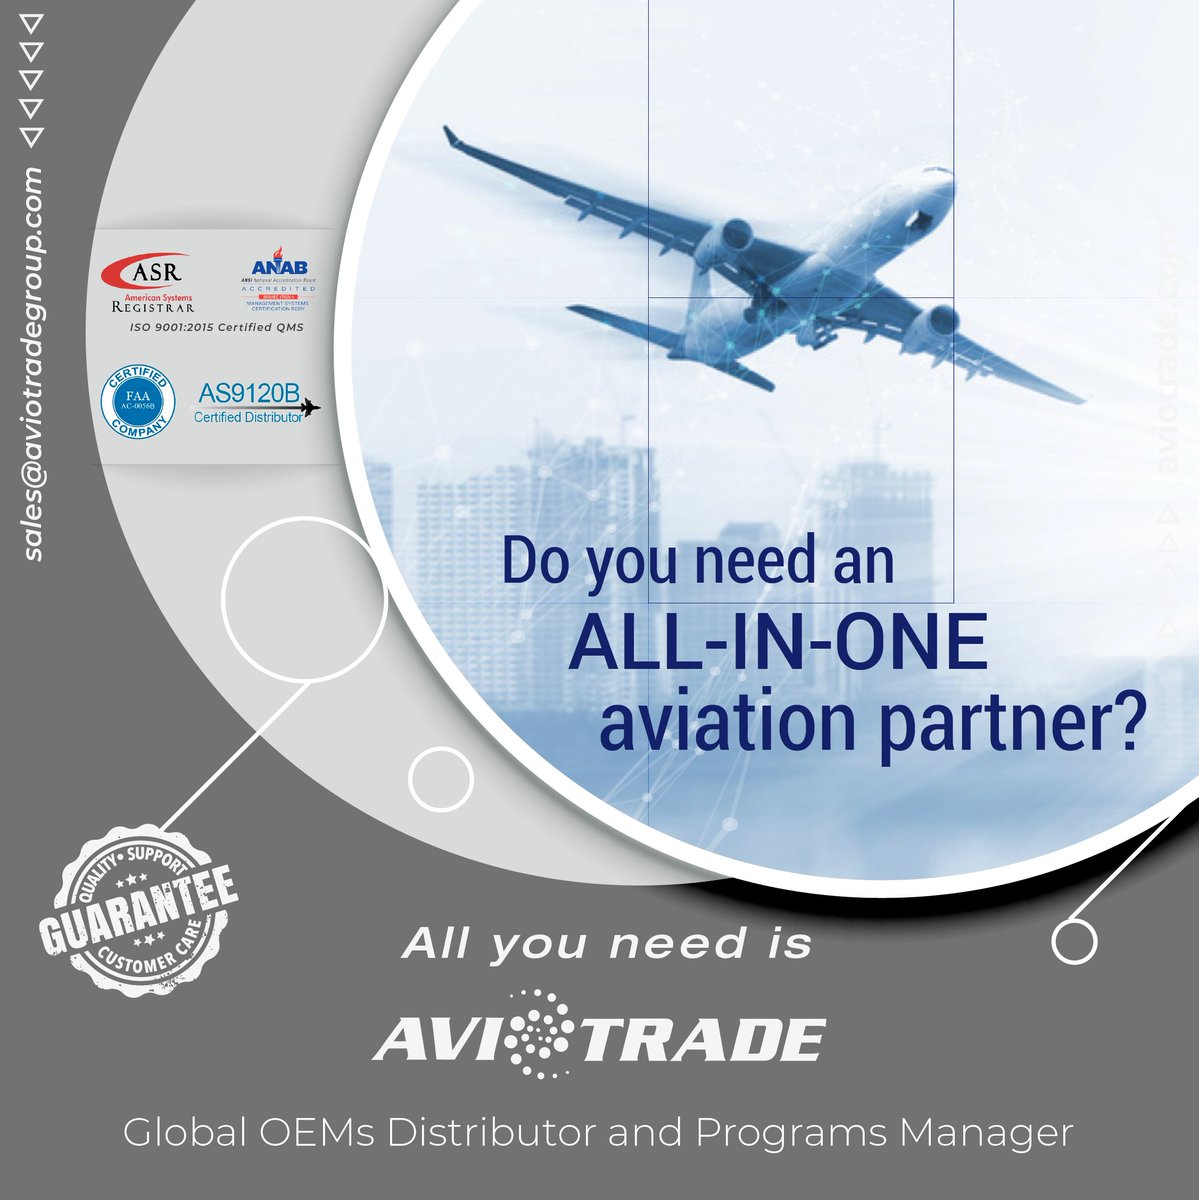 ✈ 𝐑𝐞𝐚𝐝𝐲 𝐟𝐨𝐫 𝐭𝐚𝐤𝐞𝐨𝐟𝐟? #AvioTrade has you covered! 🌐✨
Your one-stop aviation procurement source.

📌𝐂𝐨𝐧𝐭𝐚𝐜𝐭 𝐮𝐬:  sales@aviotradegroup.com

#AvioTrade #AvioTradeGroup #AllYouNeed #AviationIndustry #SupplyChain #VMI #SpecializedTools #SkyHighServices